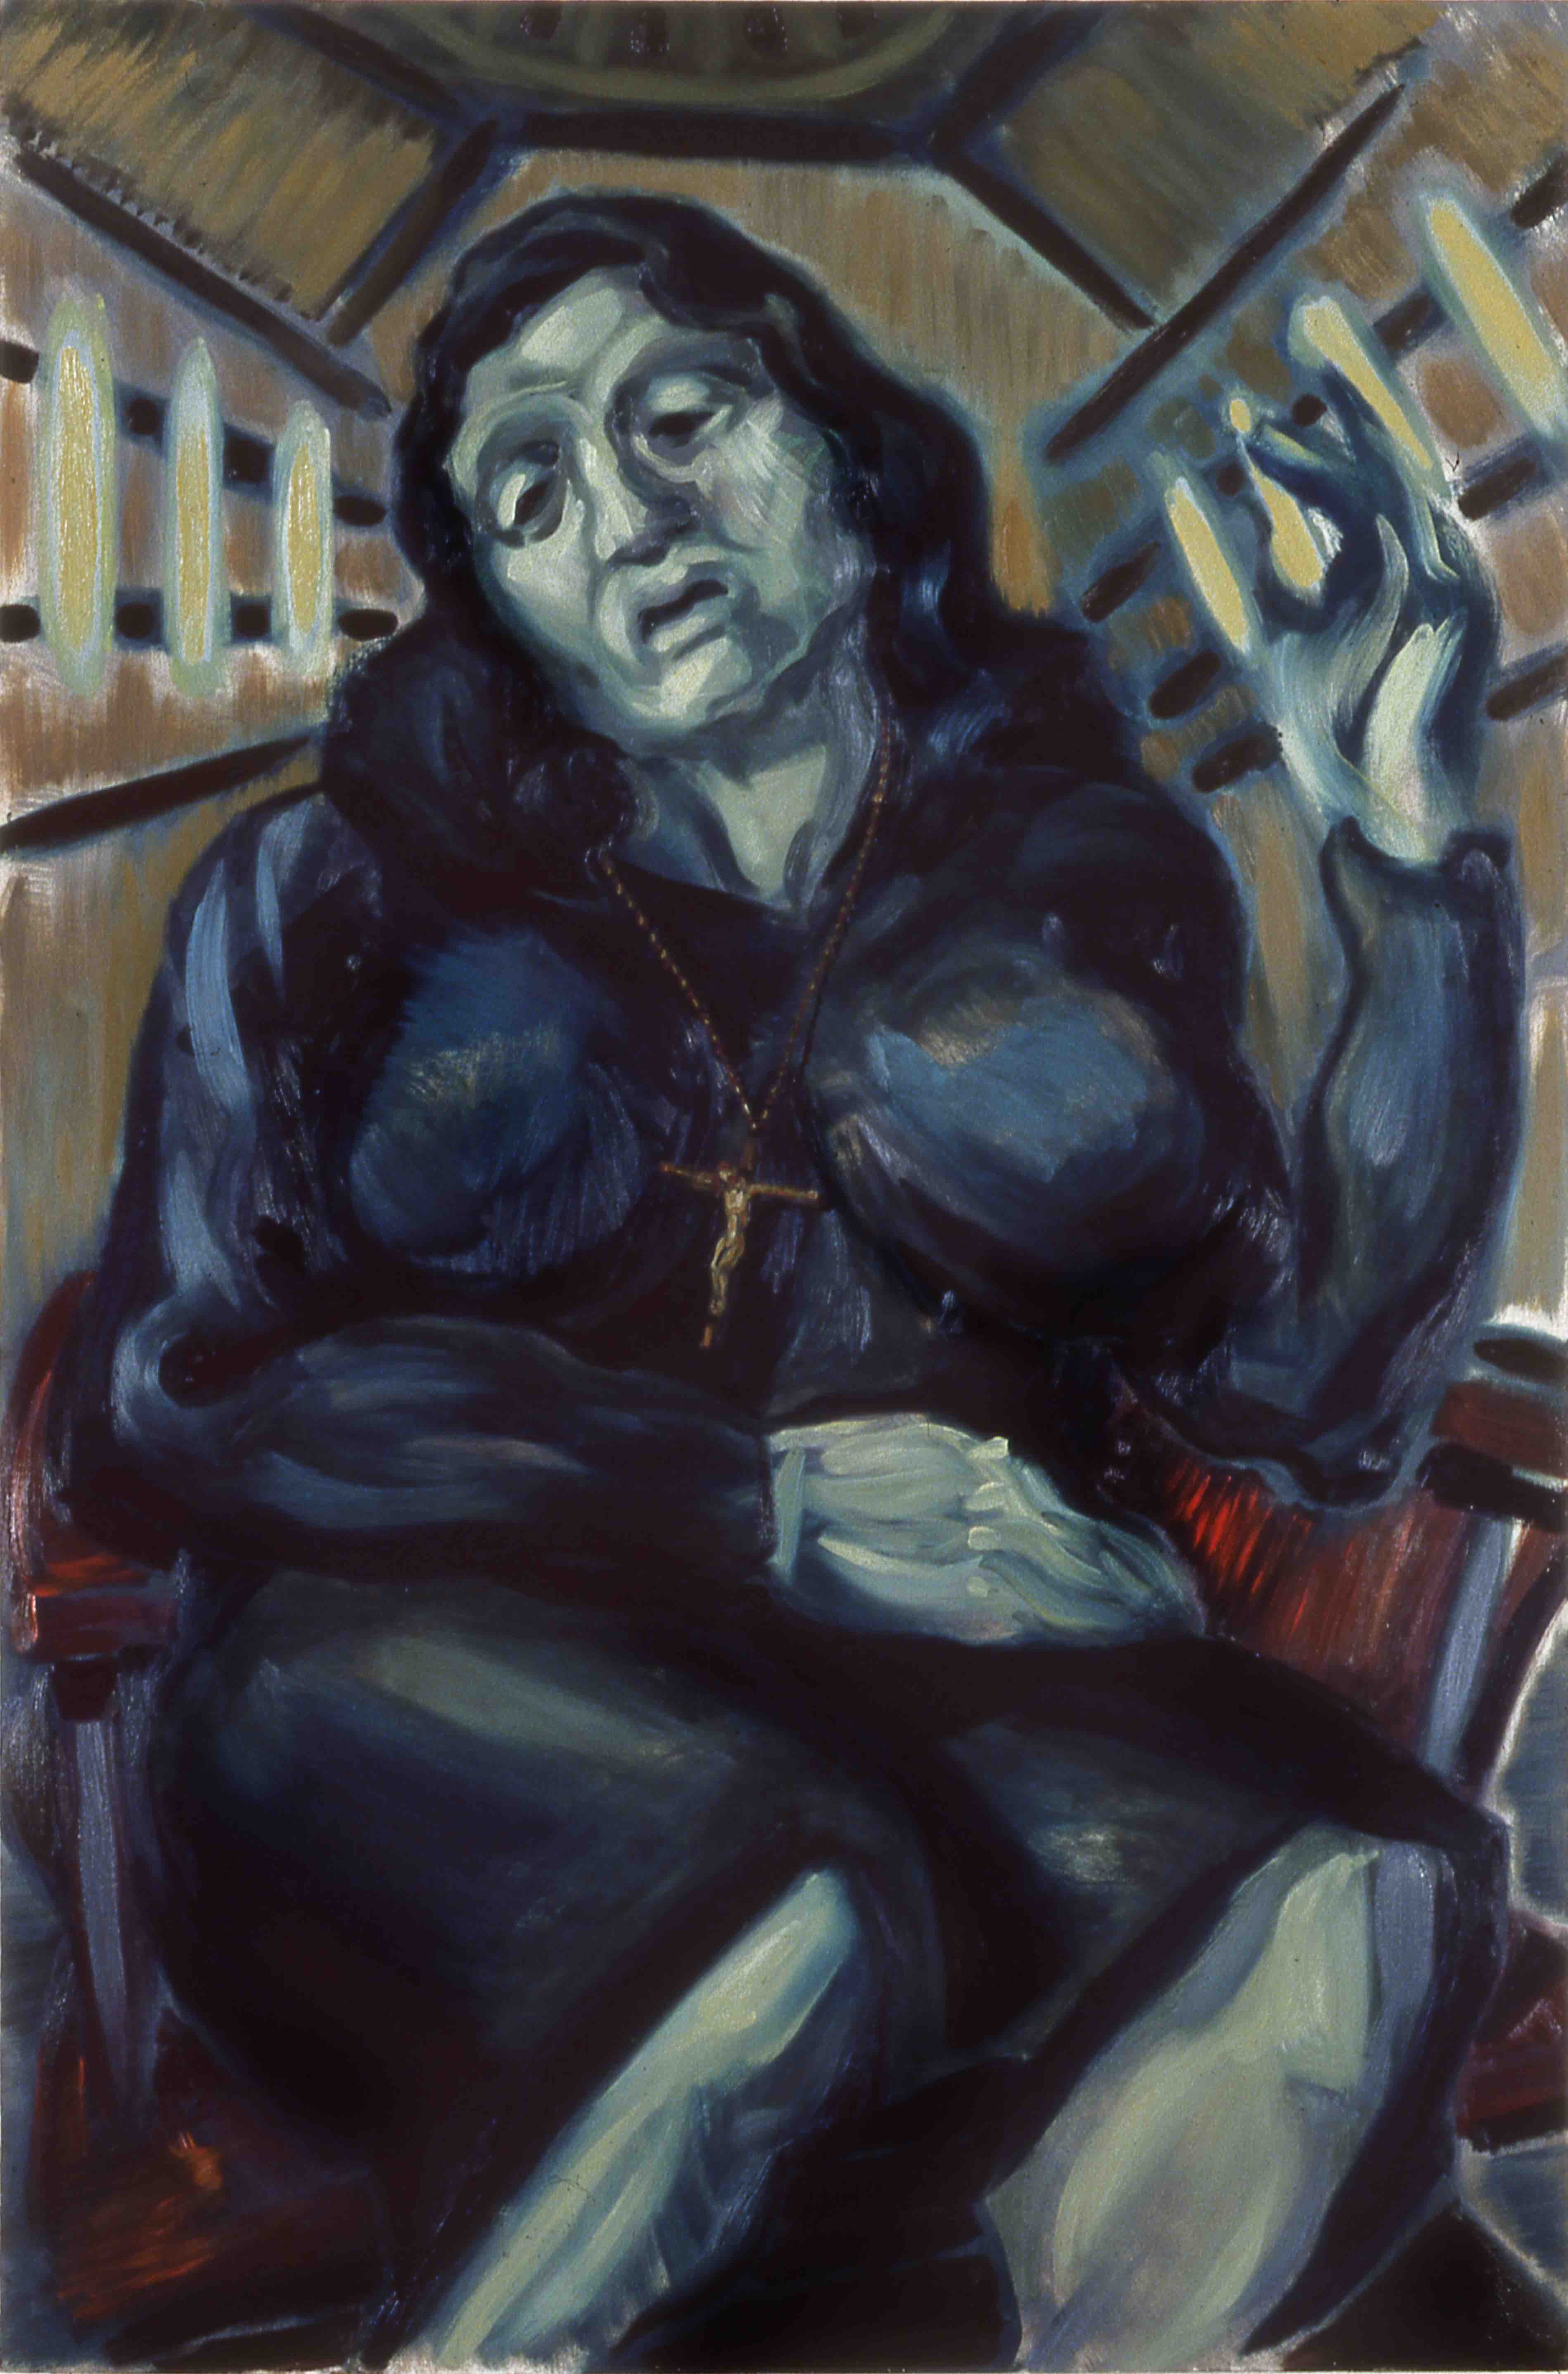 THE PROFESSIONAL MOURNER, painted by Vince Mancuso in 1990, oil on canvas 4x6 feet. Available